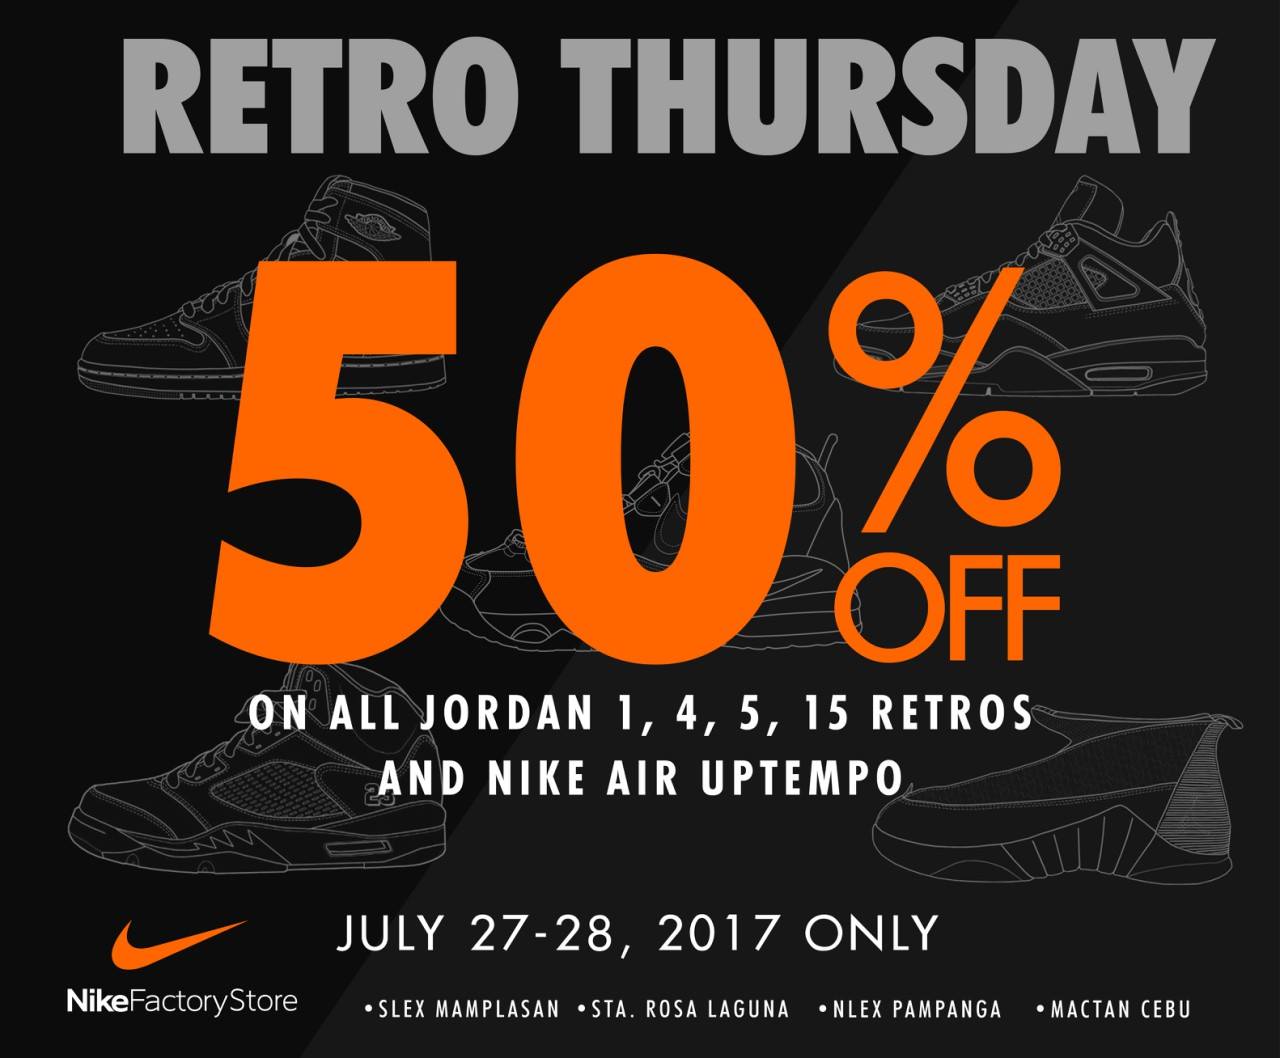 nike up to 50 off